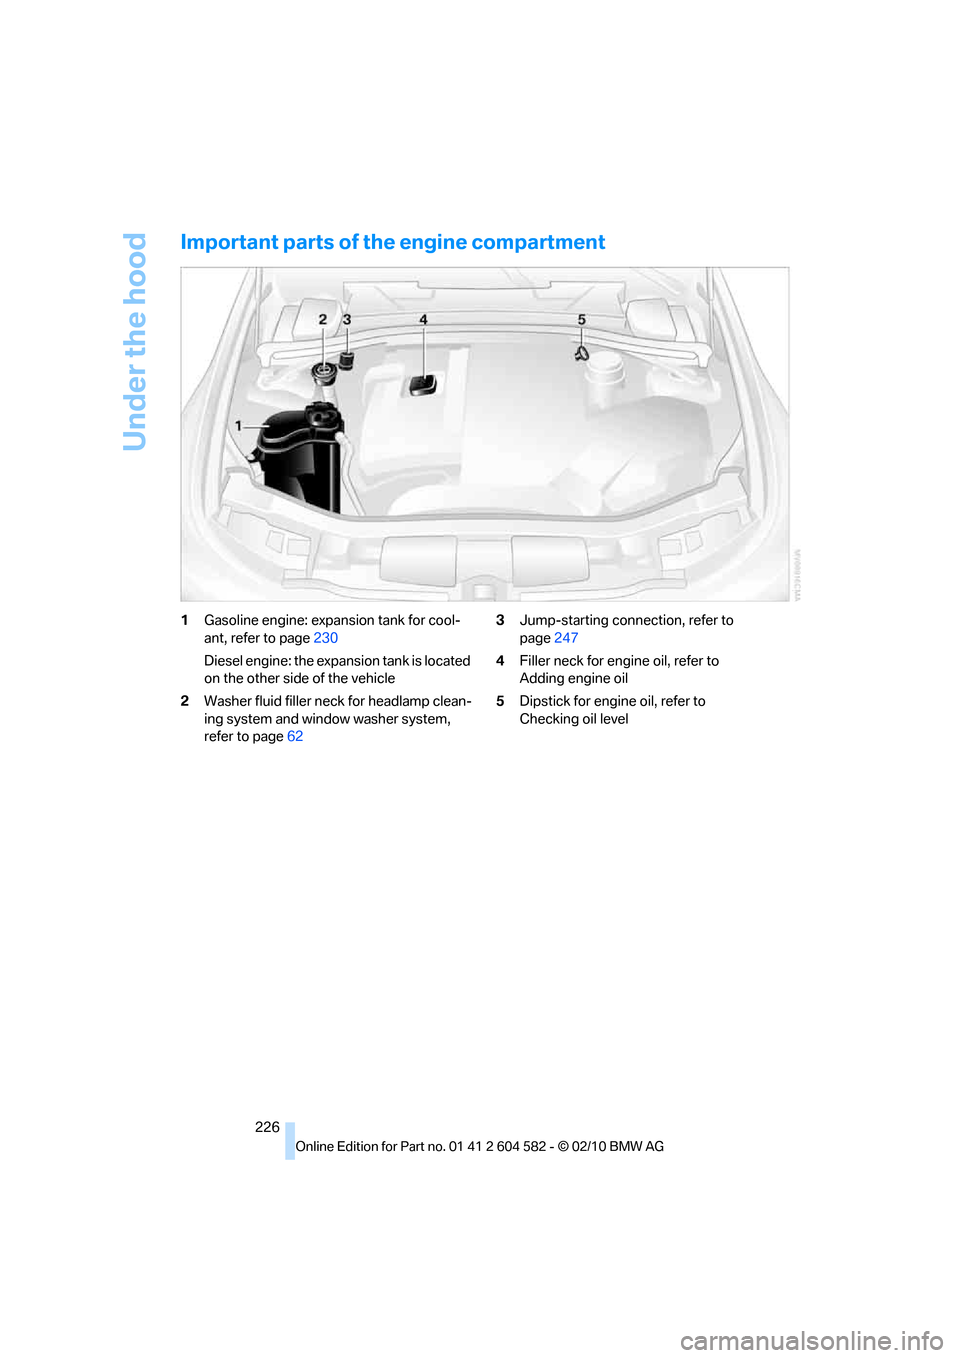 BMW 335I XDRIVE 2011 E90 Owners Manual Under the hood
226
Important parts of the engine compartment
1Gasoline engine: expansion tank for cool-
ant, refer to page230
Diesel engine: the expansion tank is located 
on the other side of the veh